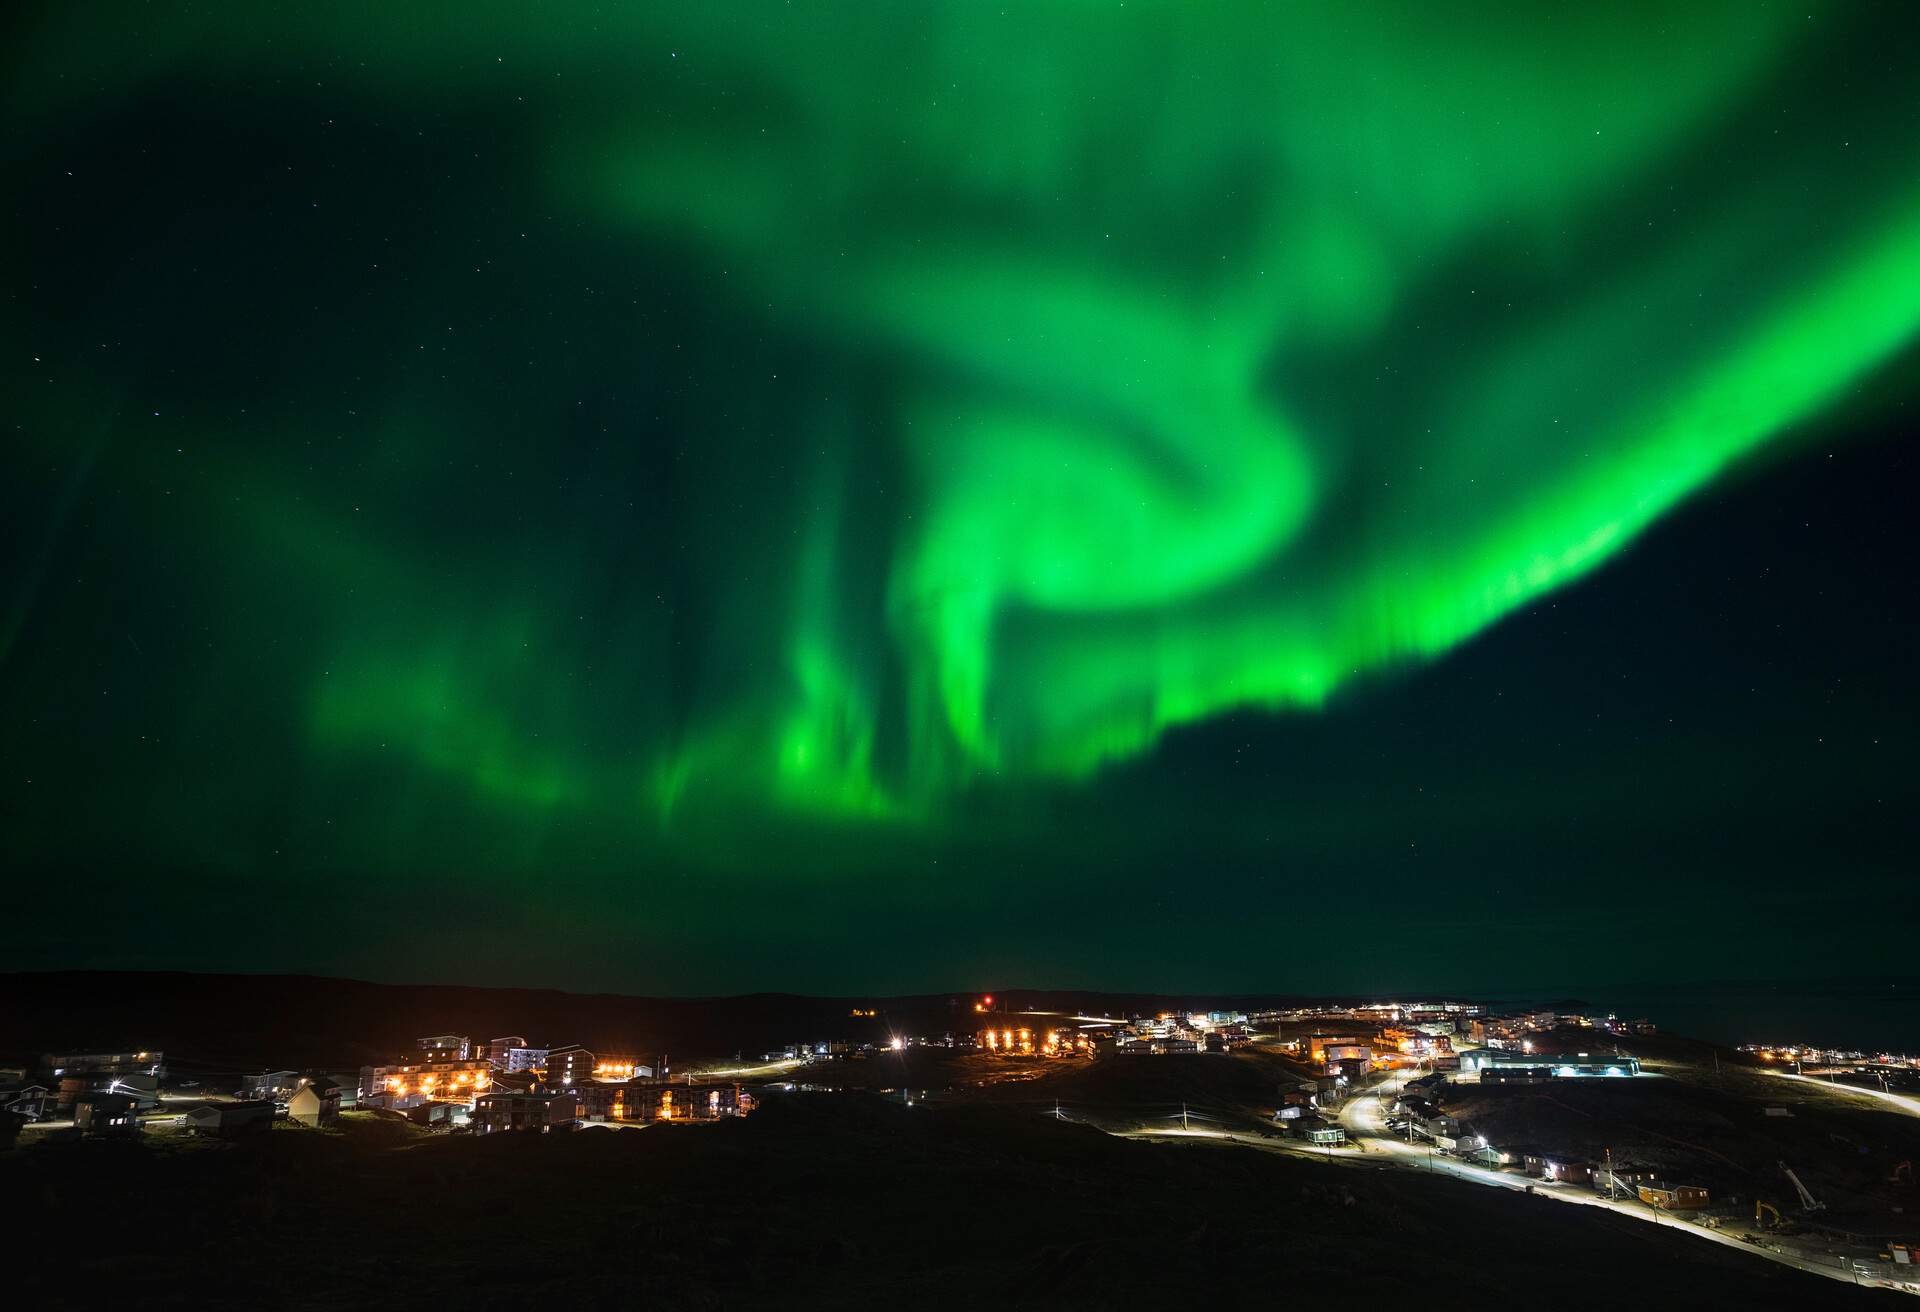 Northern lights with a swirling green tint hovering above the city's lit streets and surrounding structures at night.